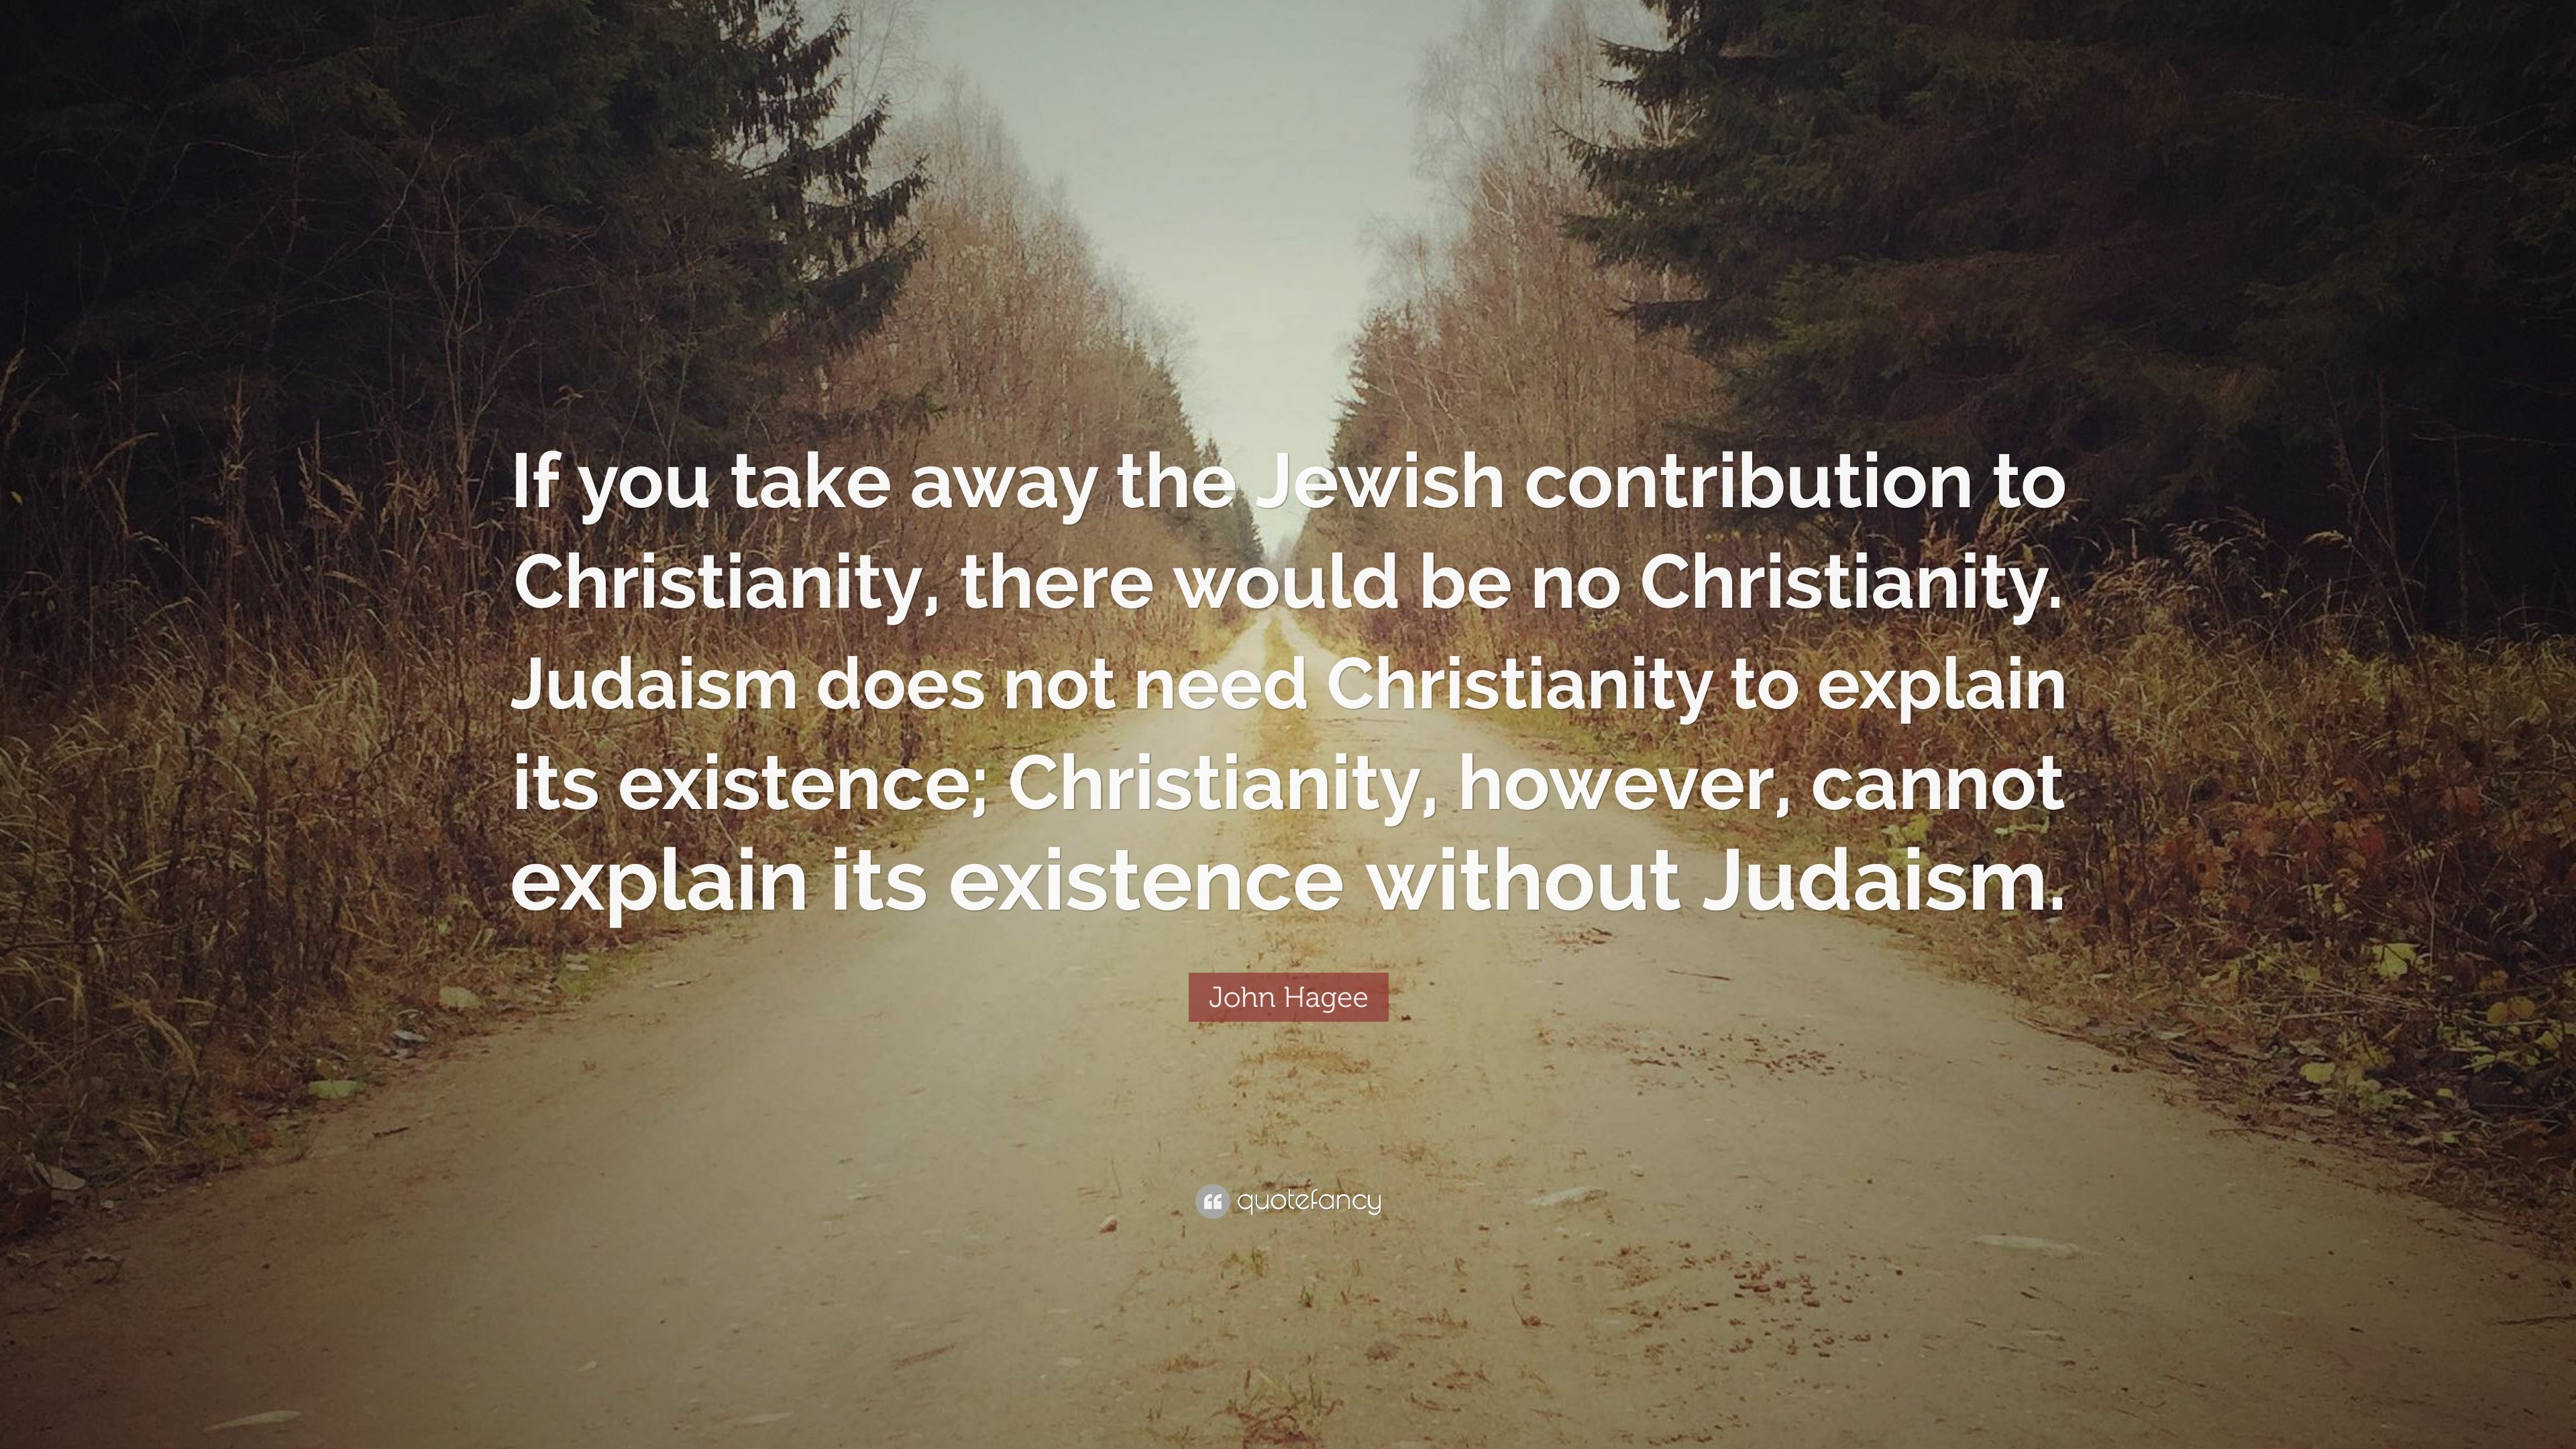 John Hagee Quote: “If you take away the Jewish contribution to